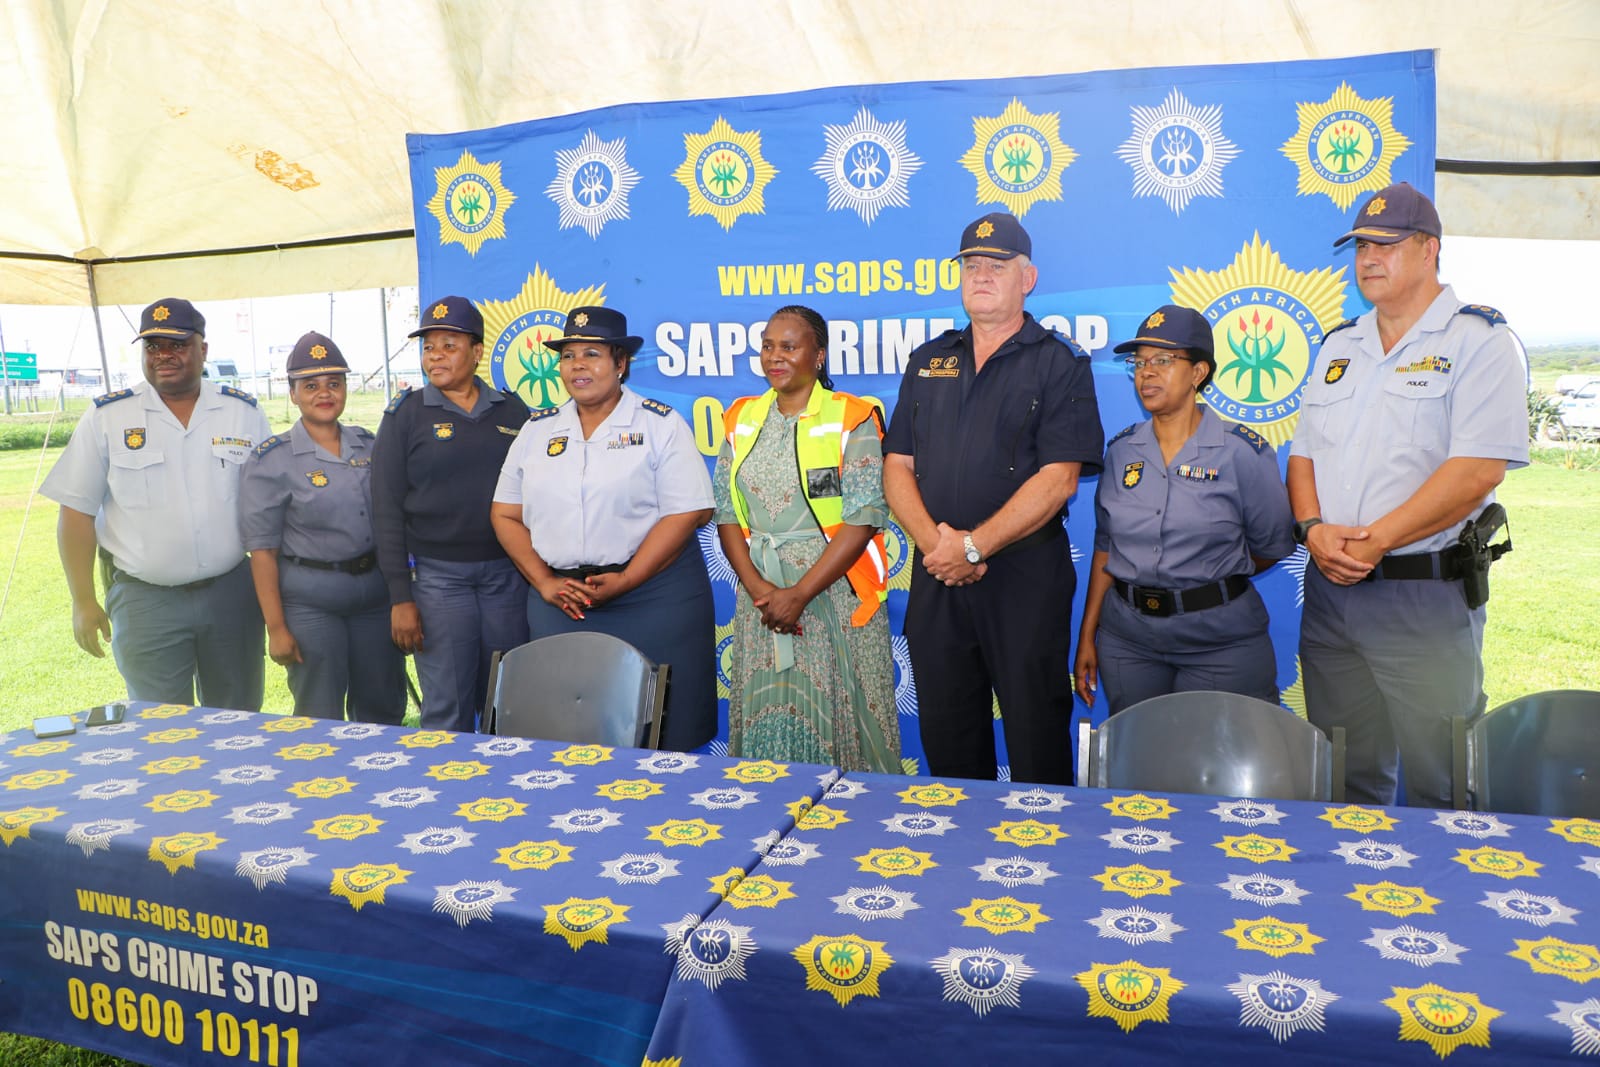 Two foreign Nationals were apprehended for being in possession of illicit cigarettes during the Launch of a Safer Festive Season Operations on Thursday 24 November 2022.